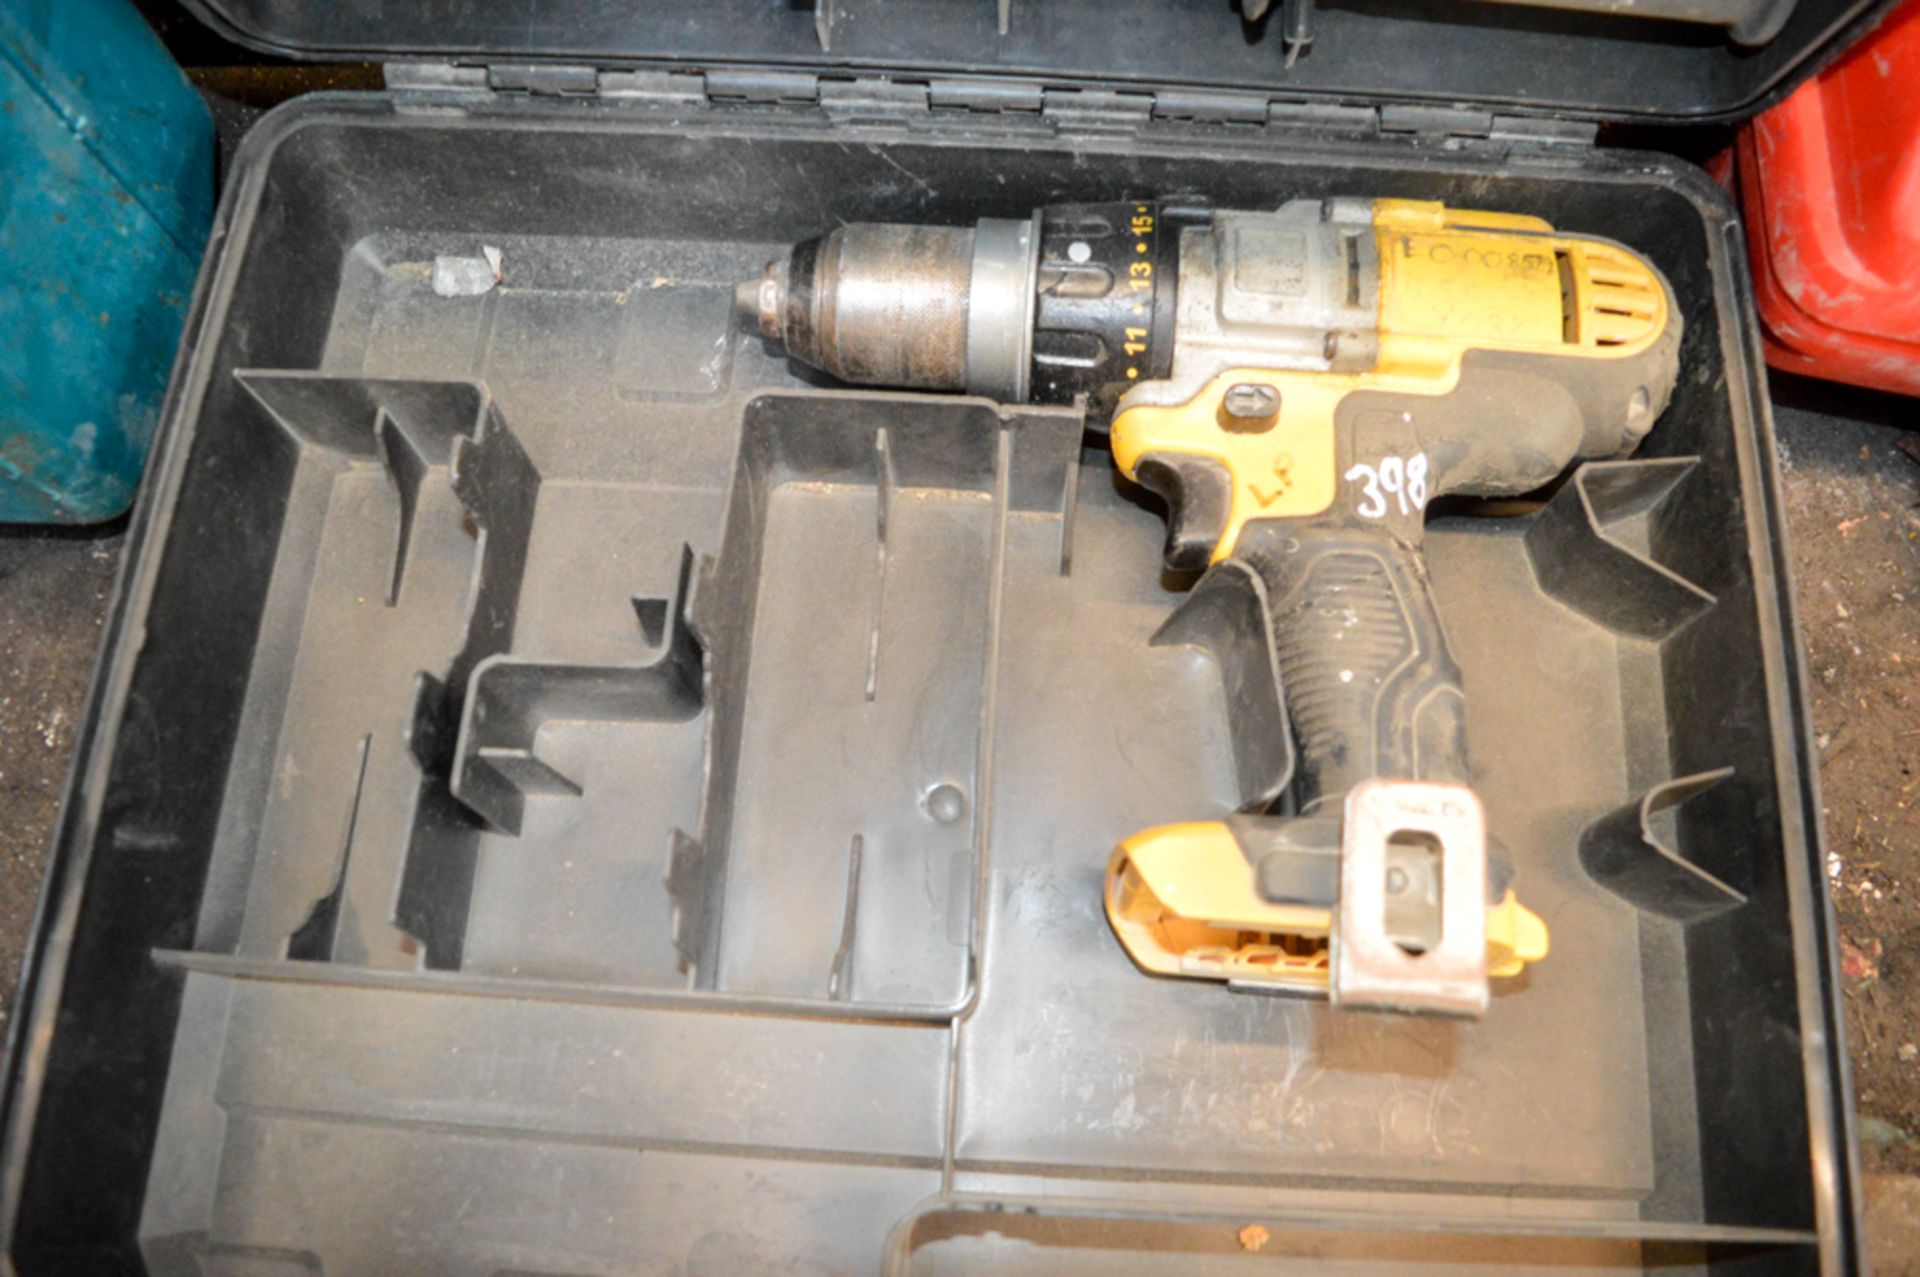 Dewalt cordless power drill c/w carry case **No battery or charger** E0008579